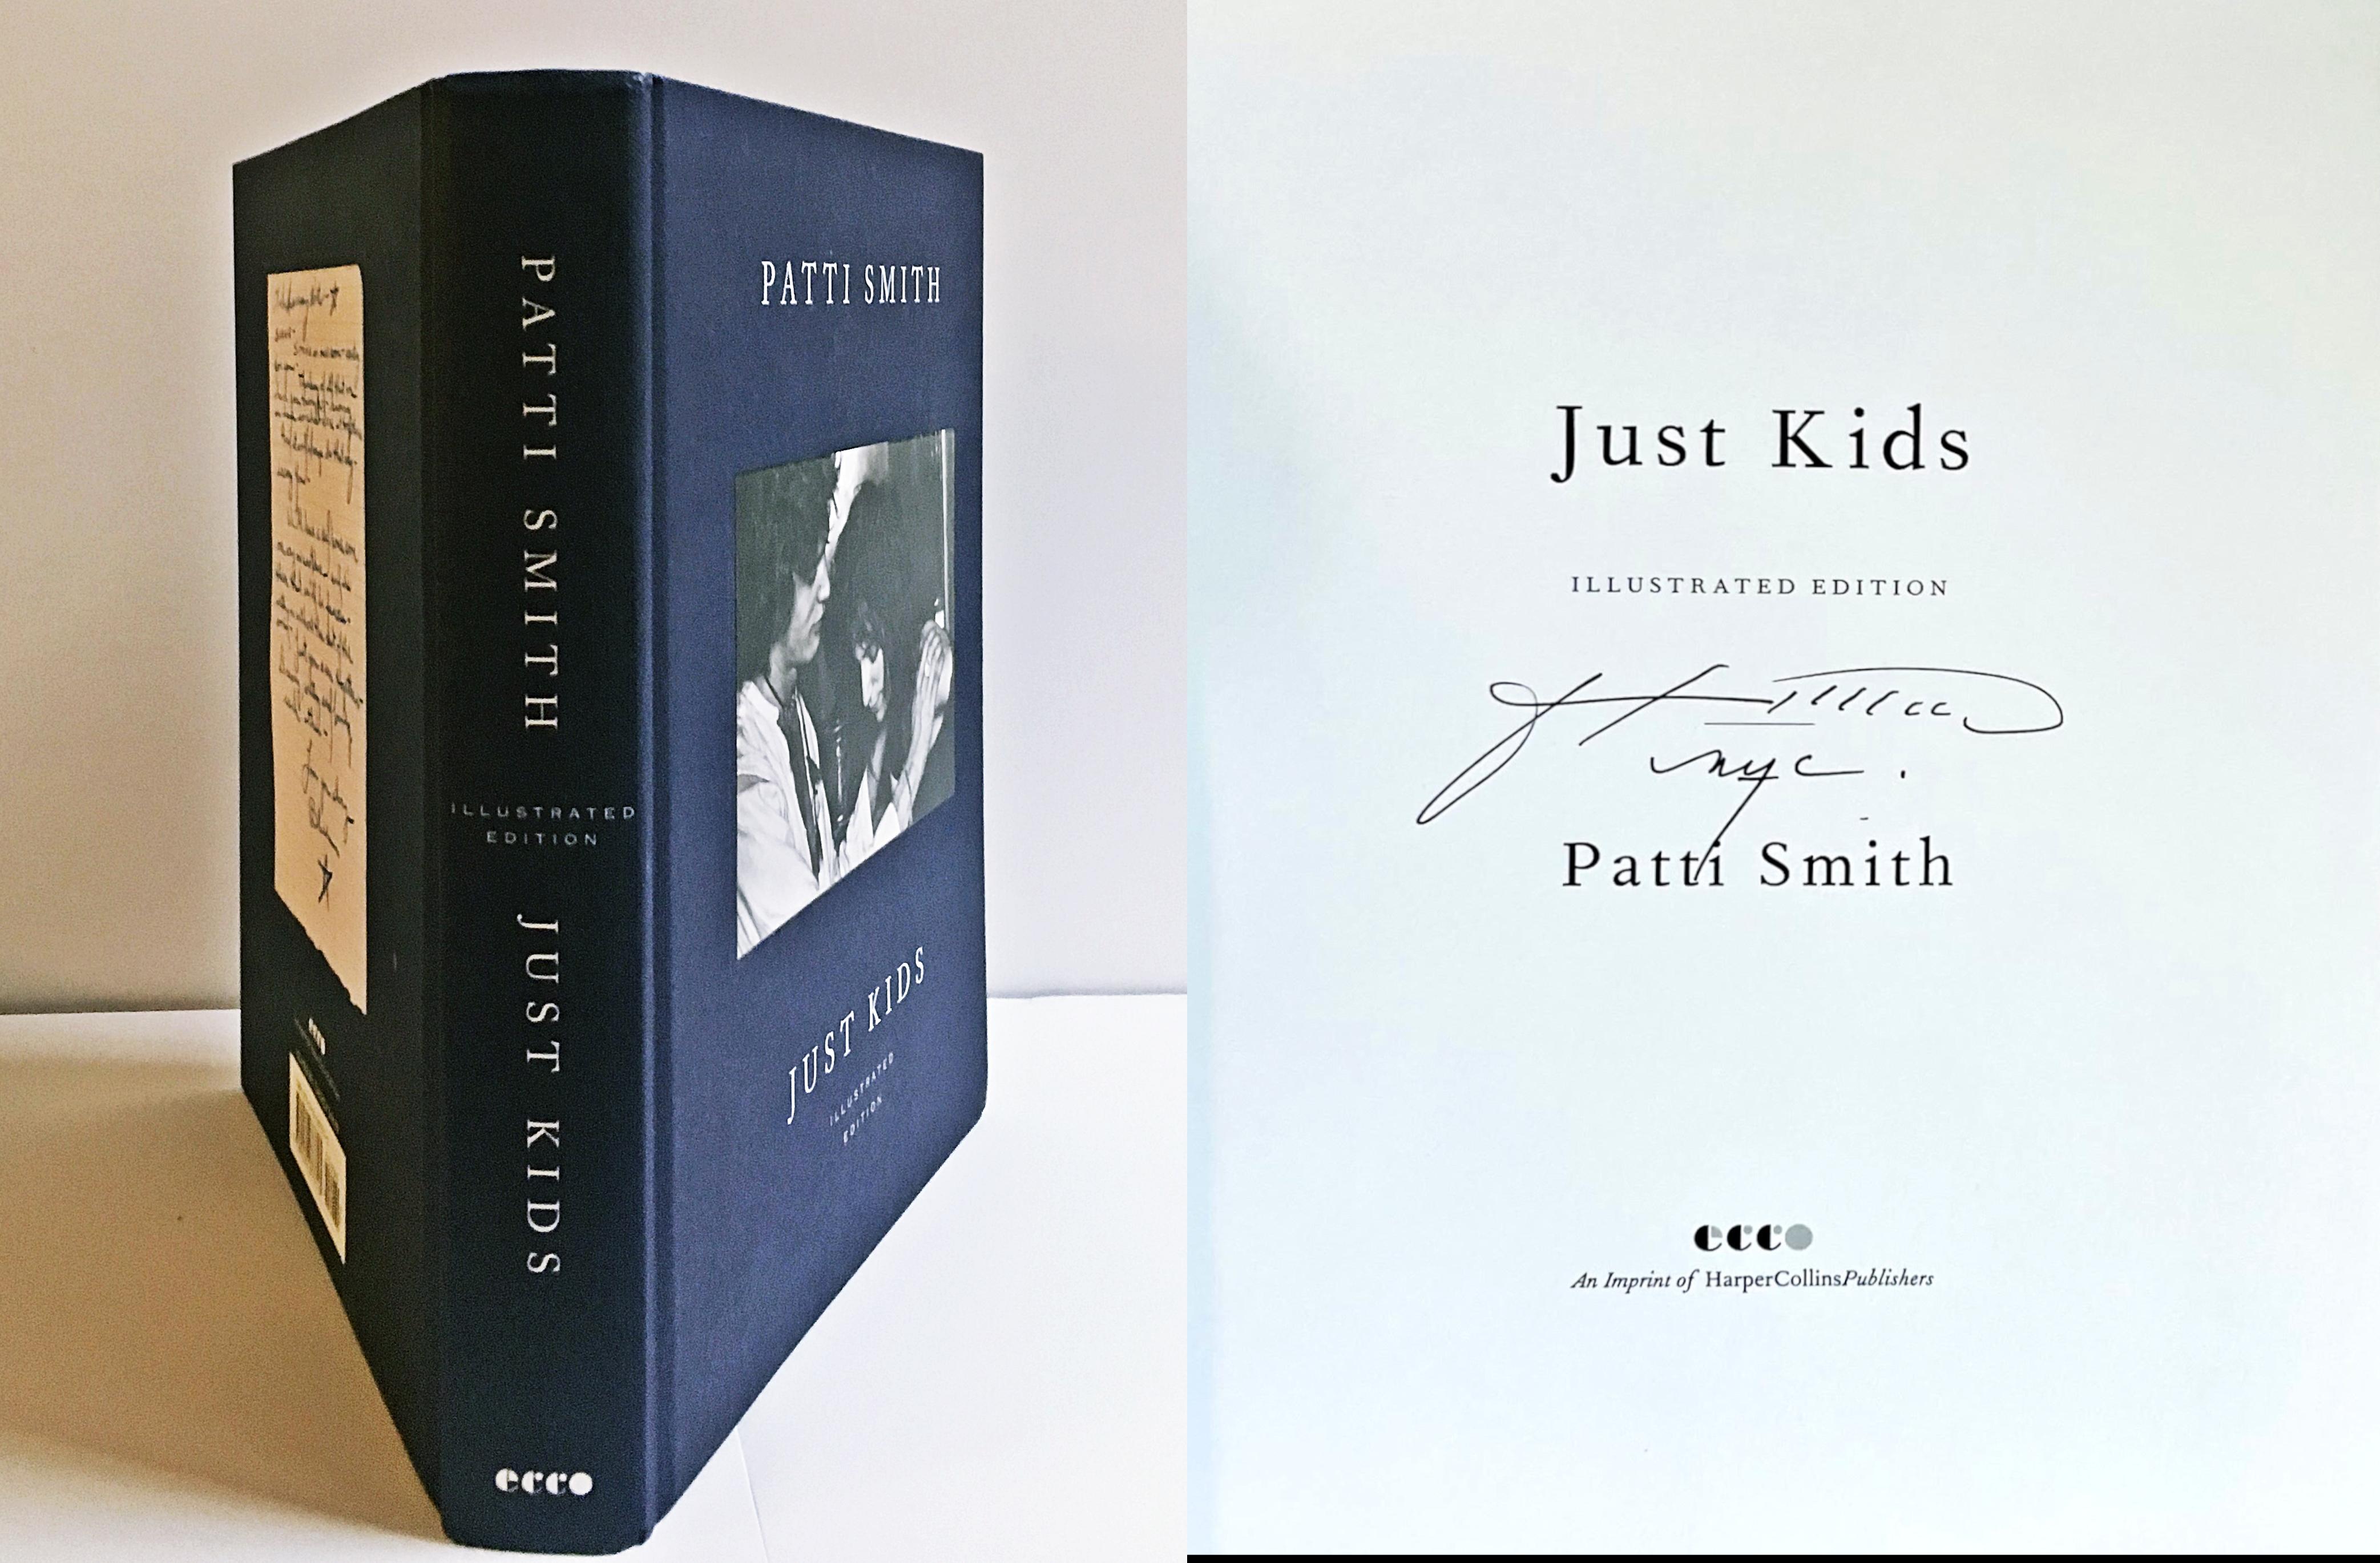 Patti Smith
Just Kids Illustrated Edition (Hand Signed and dated by Patti Smith), 2018
Hardback Monograph (Hand Signed and Inscribed by Patti Smith)
Hand signed and dated by Patti Smith
9 4/5 × 7 1/10 × 1 1/4 inches
Provenance
Hand signed by Patti